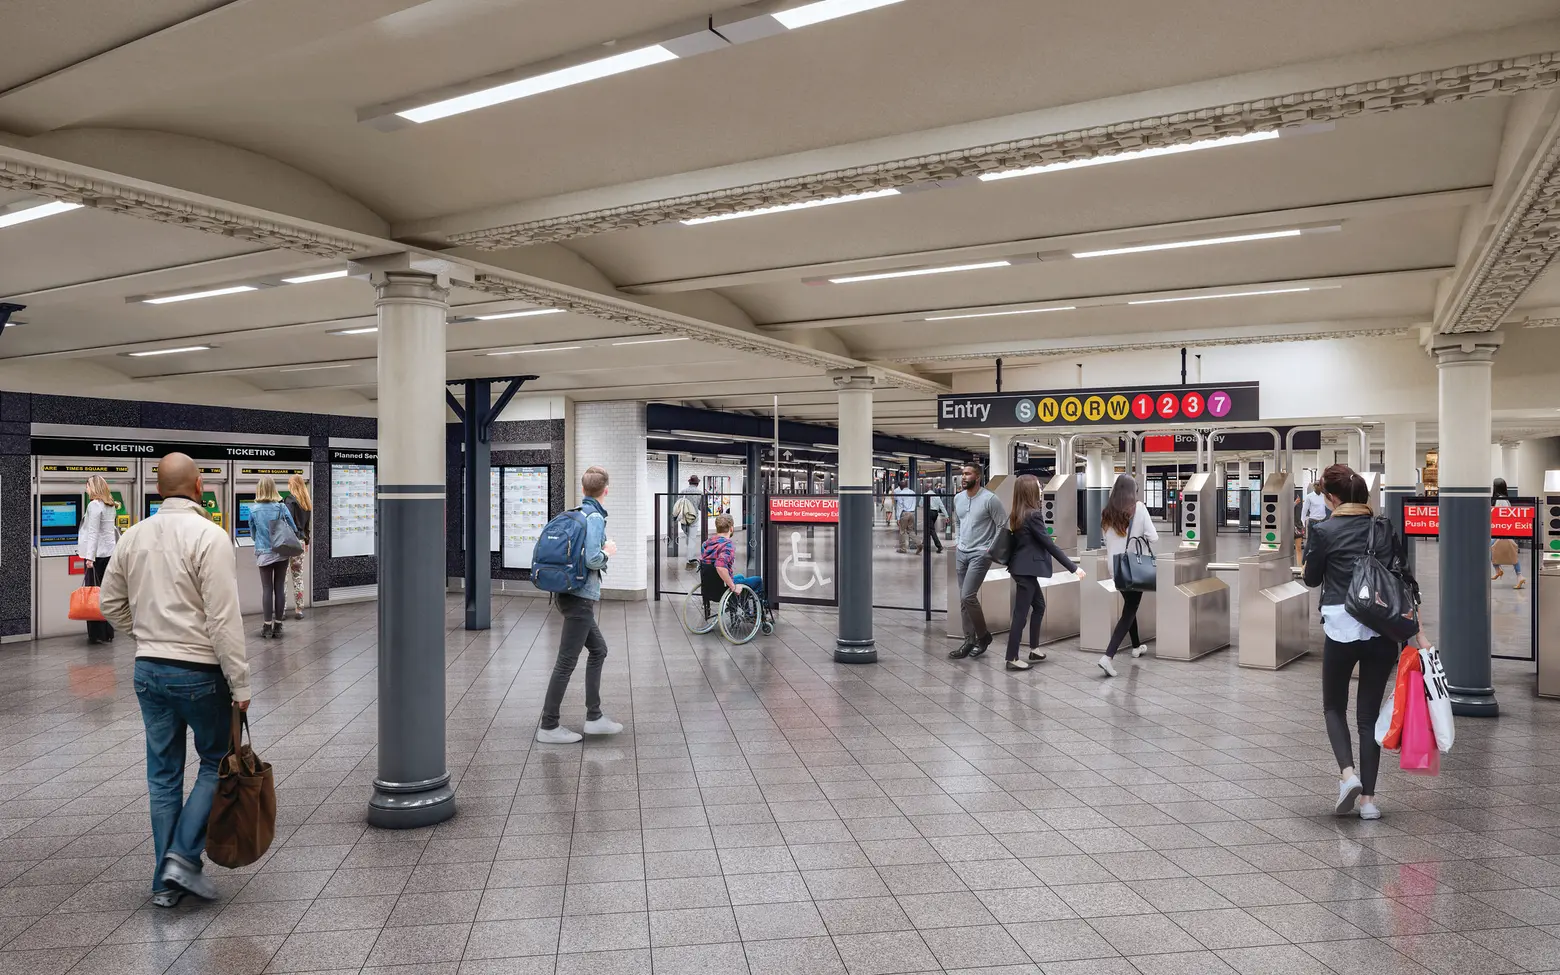 42nd Street Connection Project, MTA, transportation, 42nd street shuttle, accessibility, grand central terminal